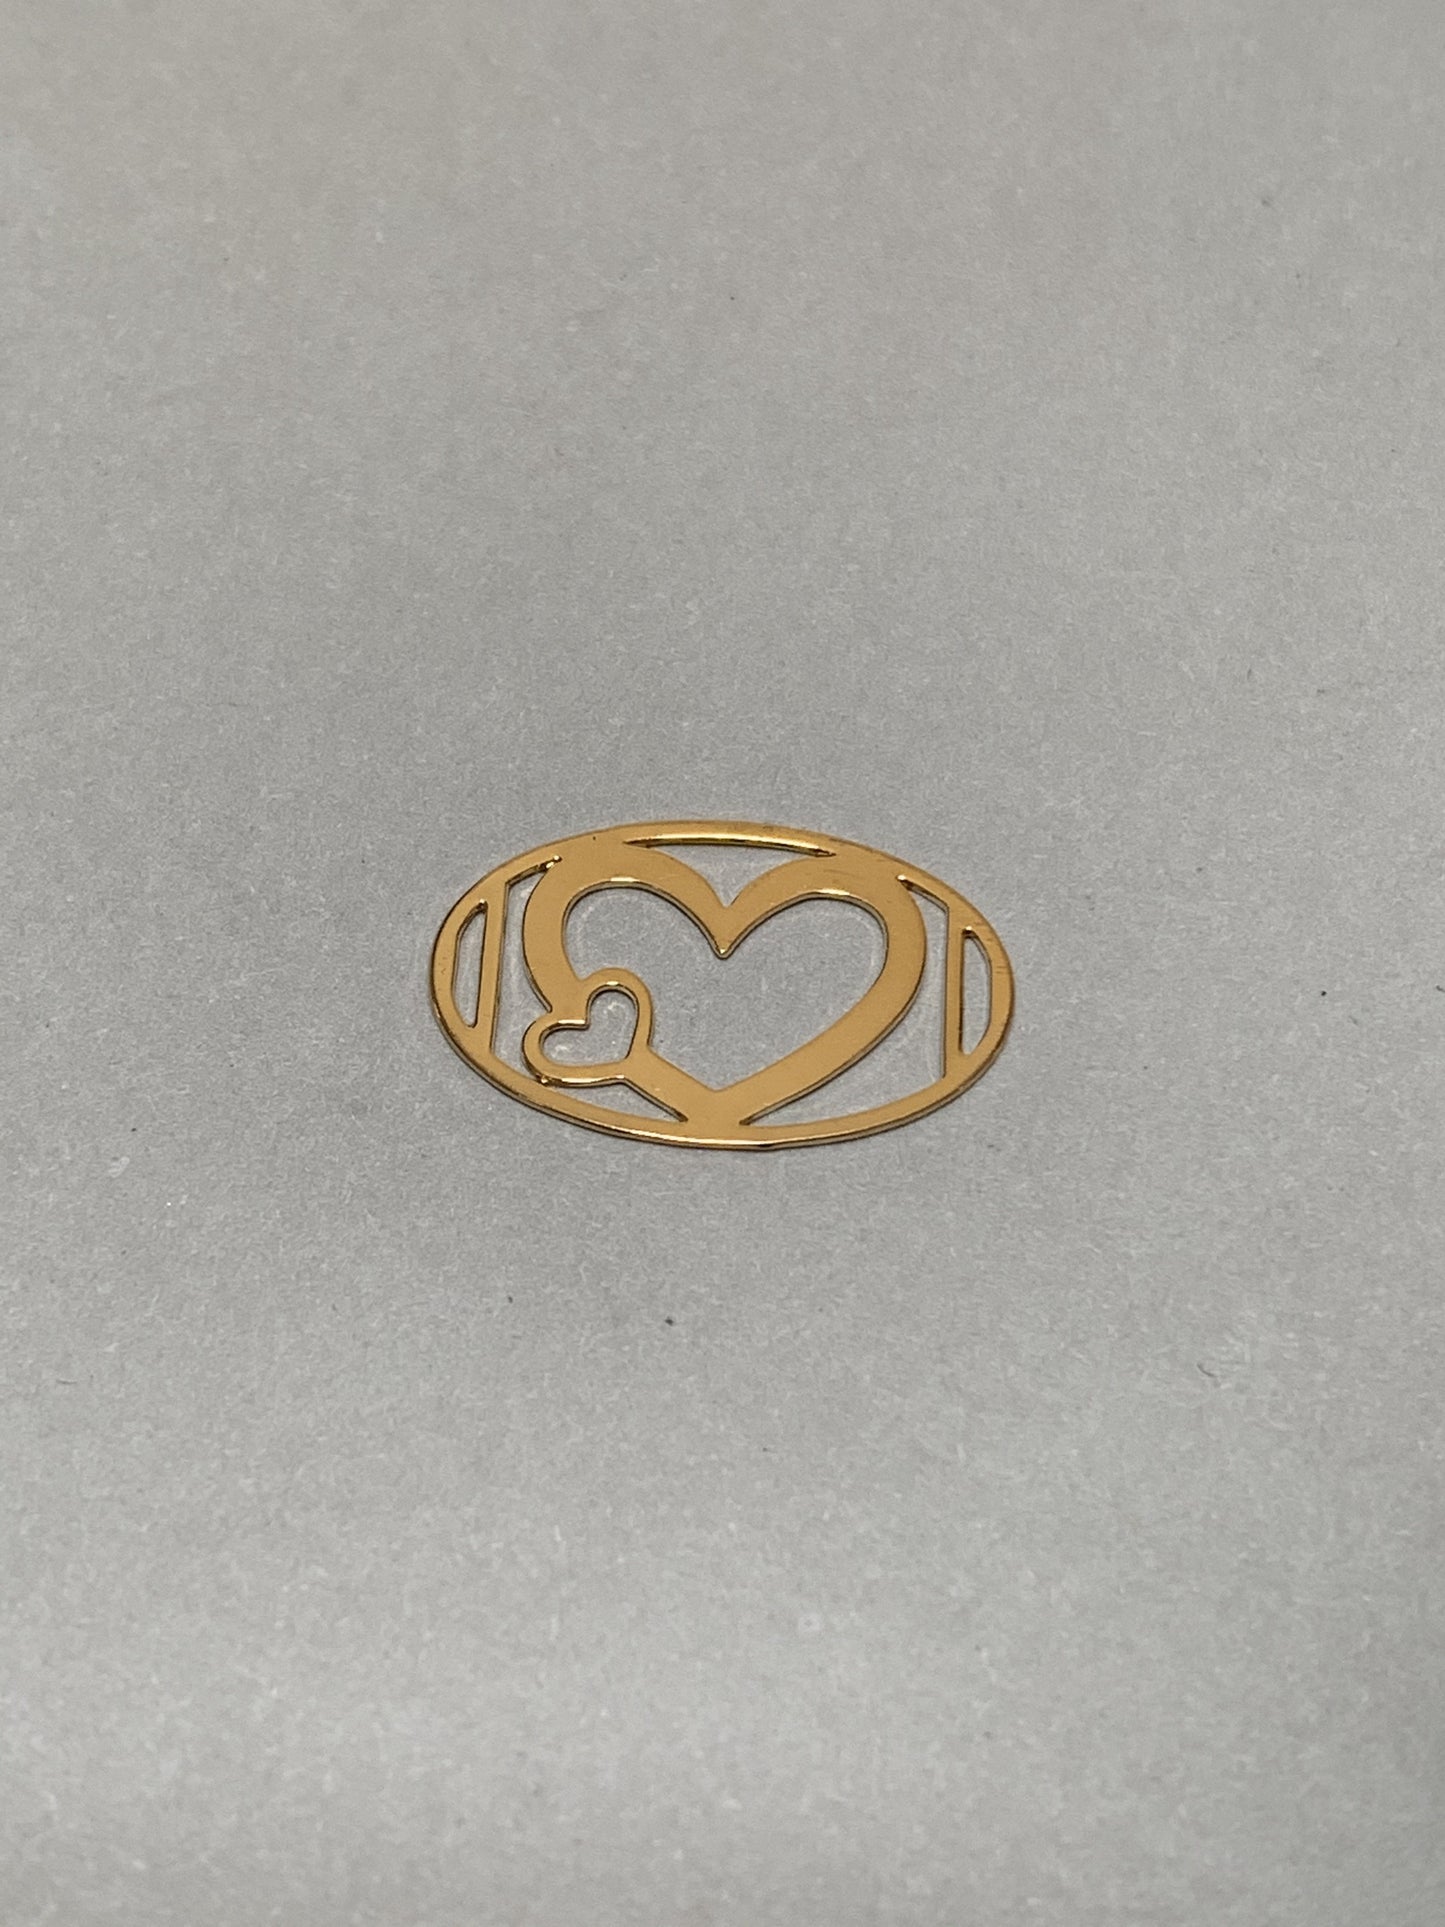 20mm Oval with Heart connector